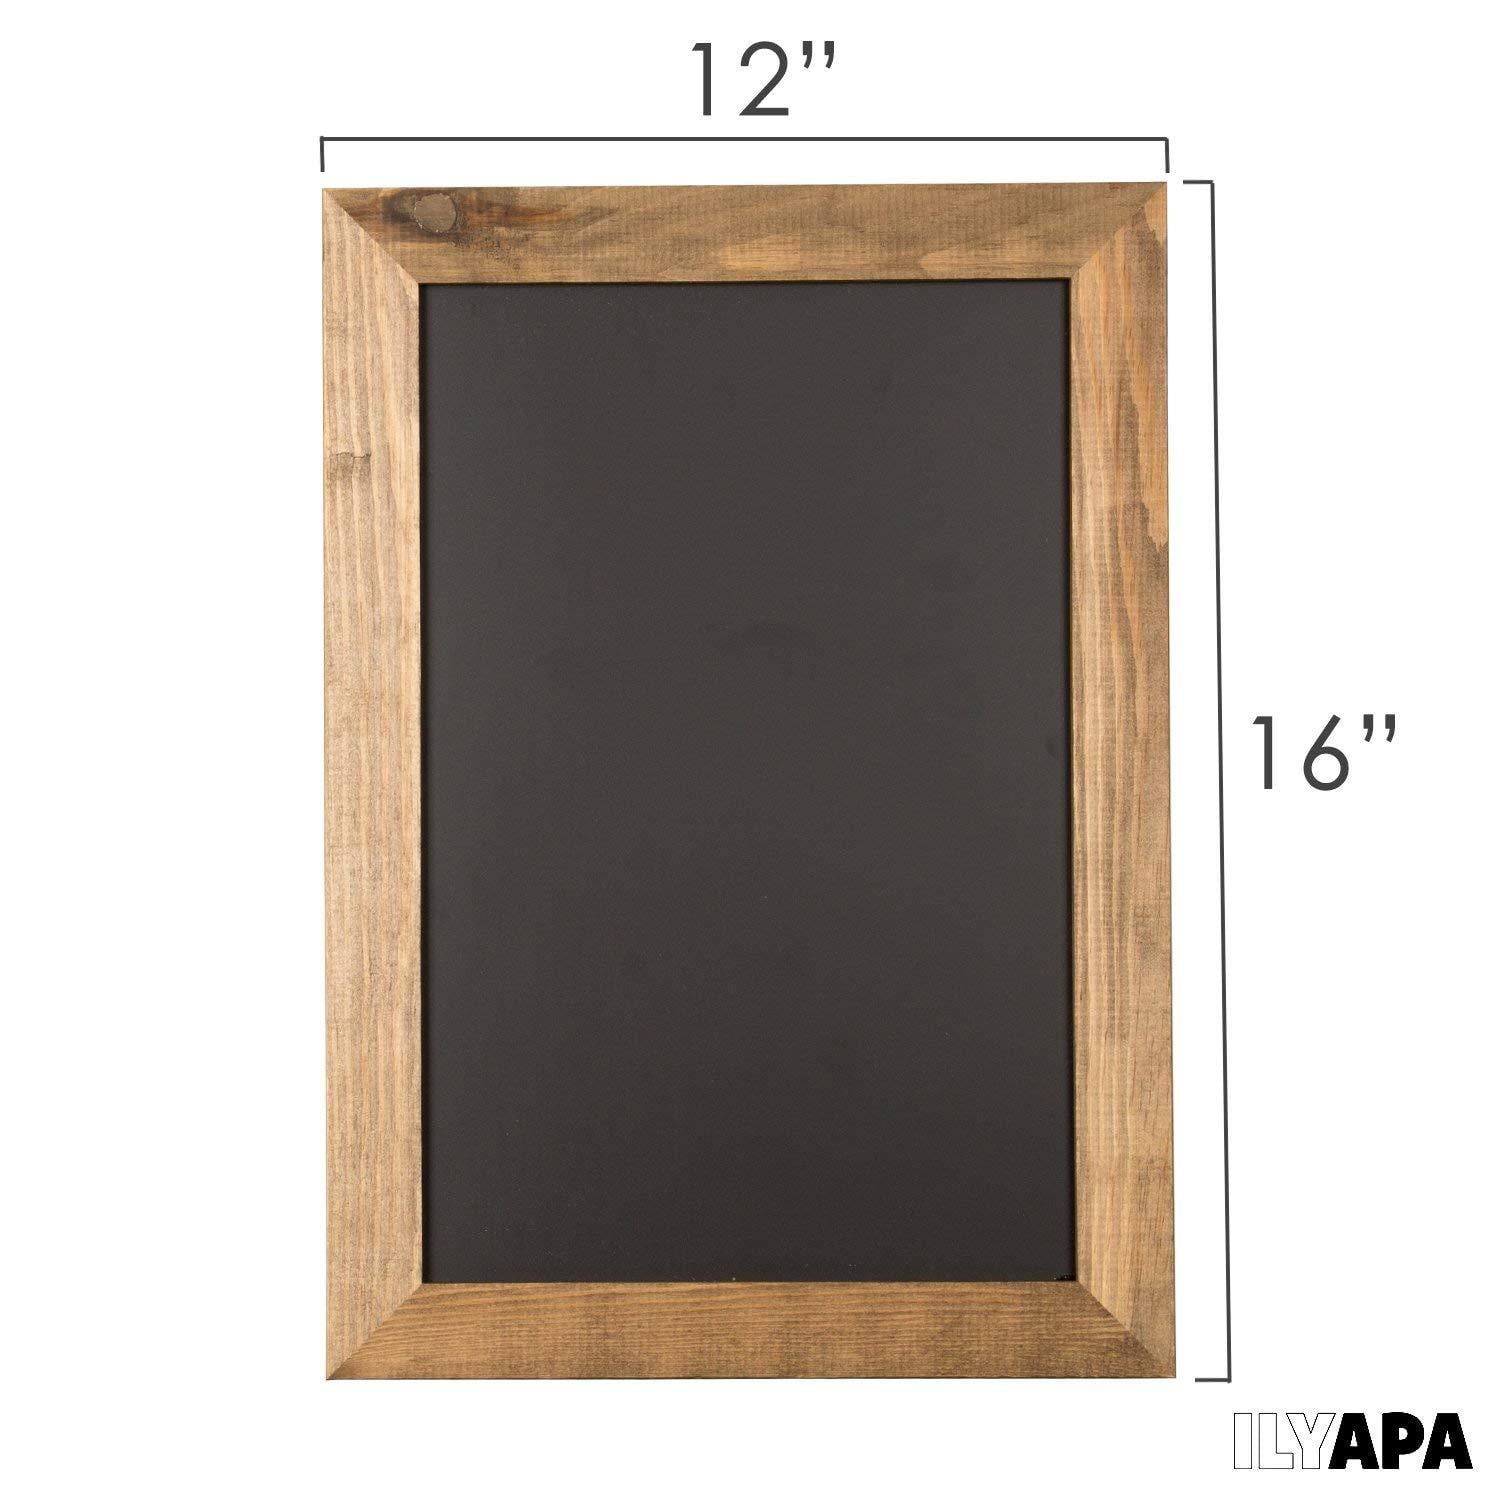 RUSTIC WOODEN BLACK CHALK BOARD WITH 3 WHITE HEARTS 